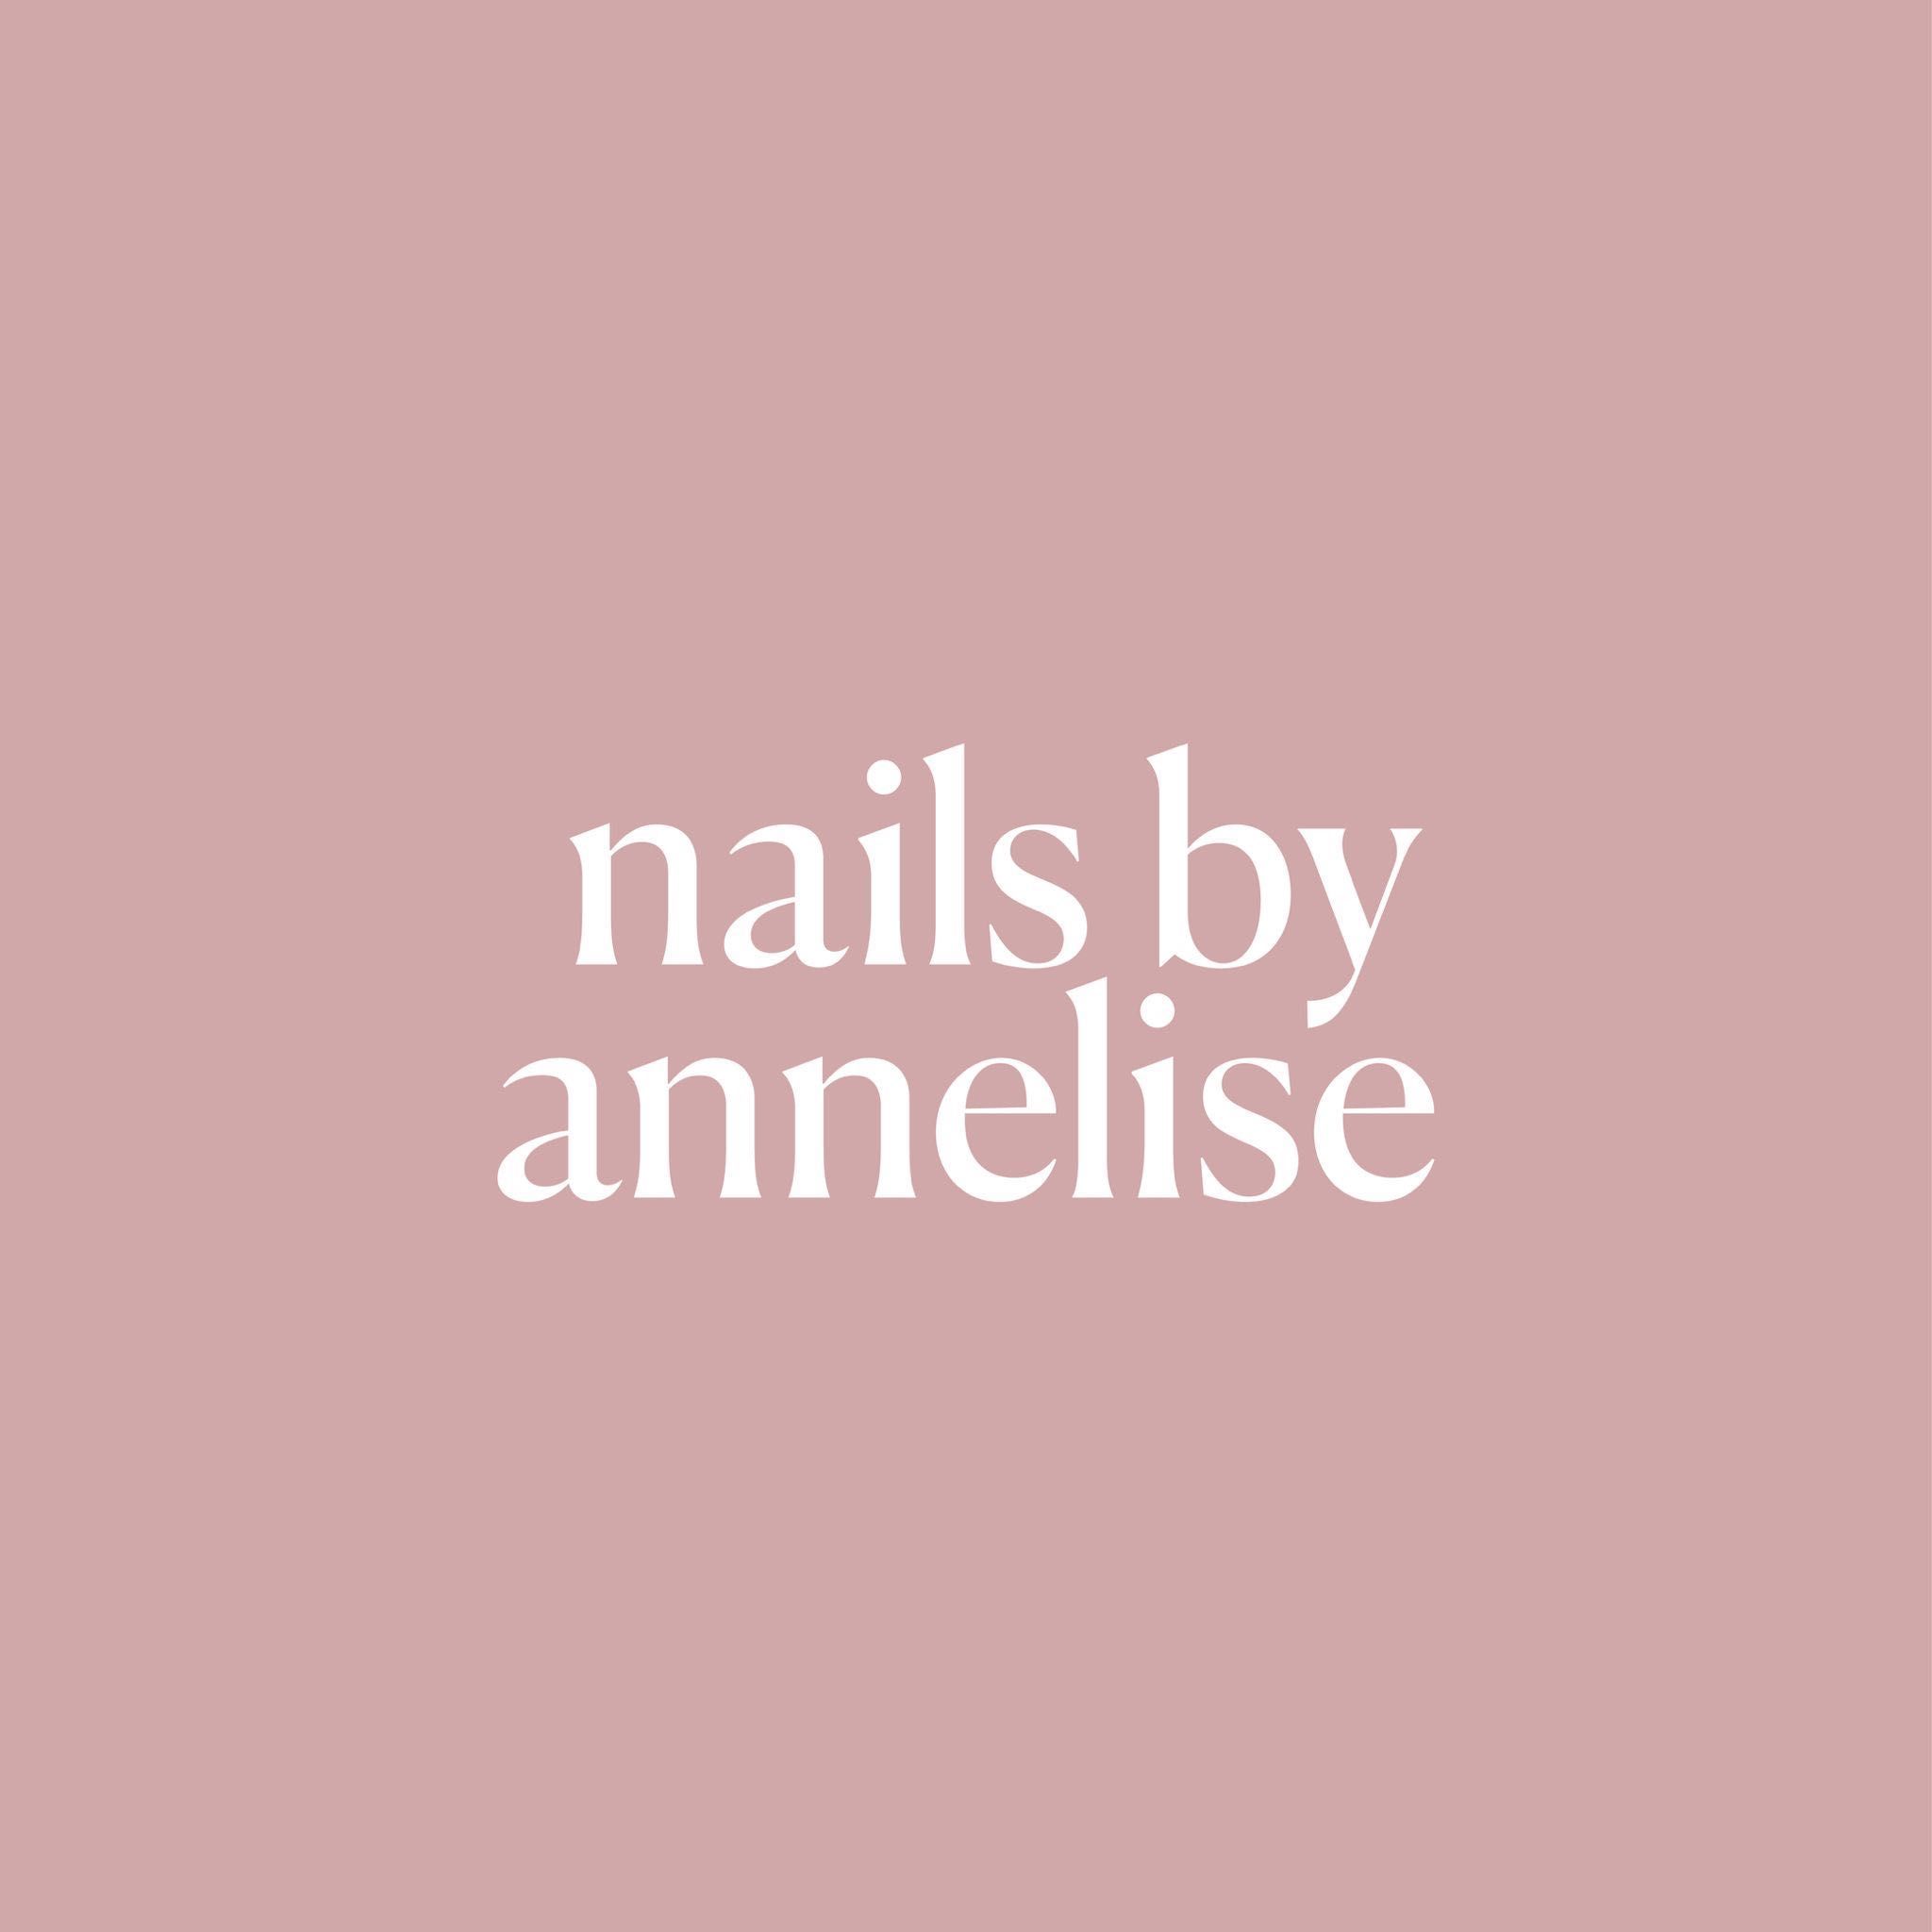 Nails by Annelise, 480 high street, RG27 8NY, Hook